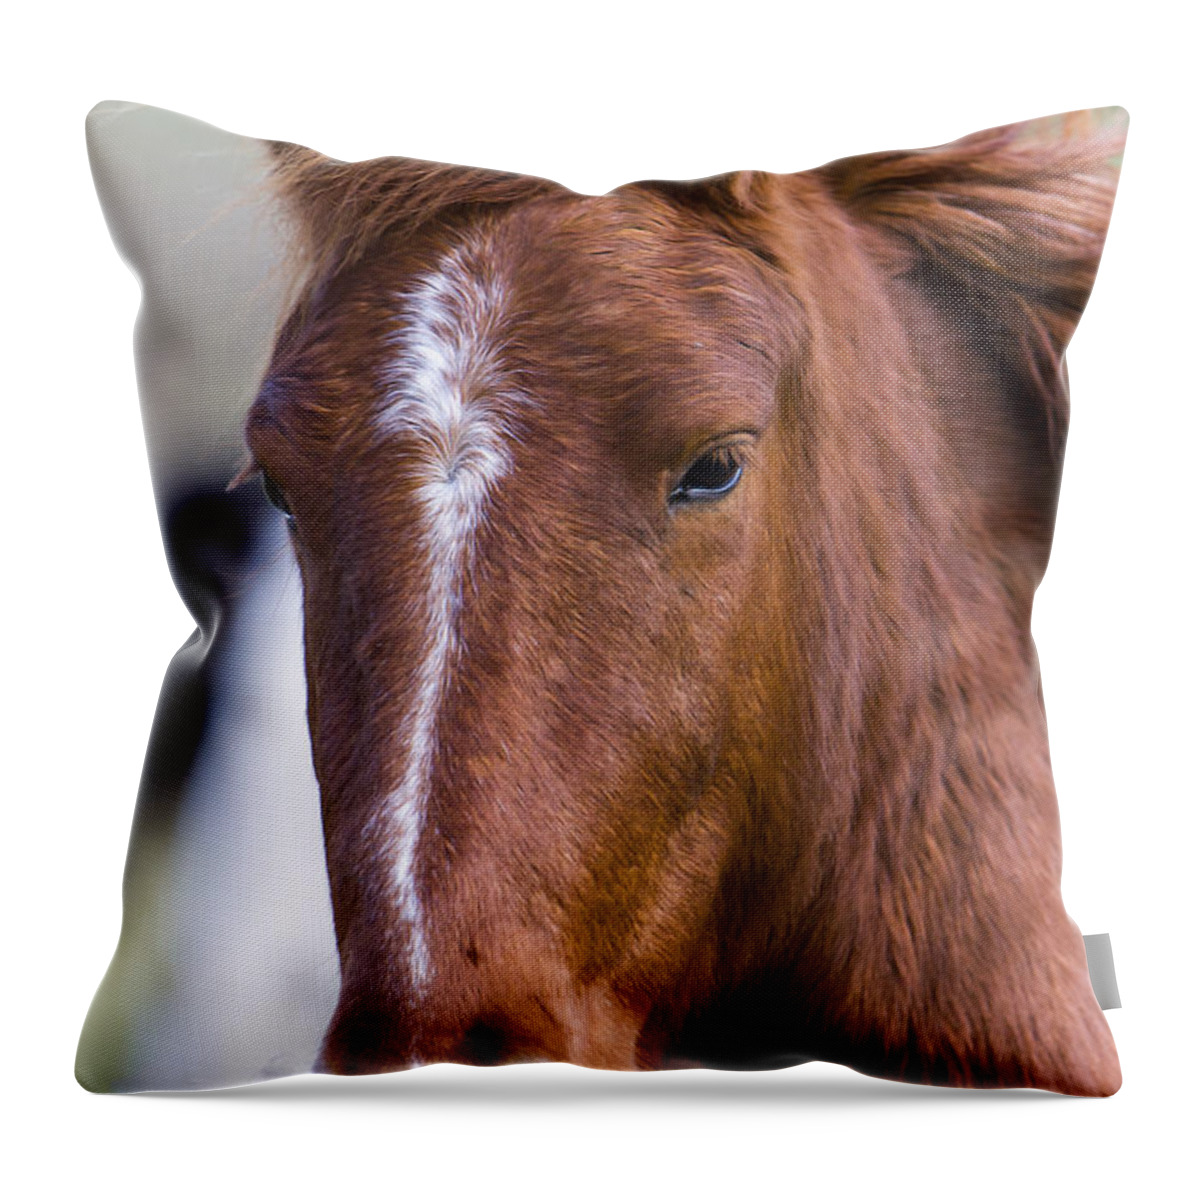 Chestnut Horse Throw Pillow featuring the photograph A Chestnut Horse portrait by Andy Myatt